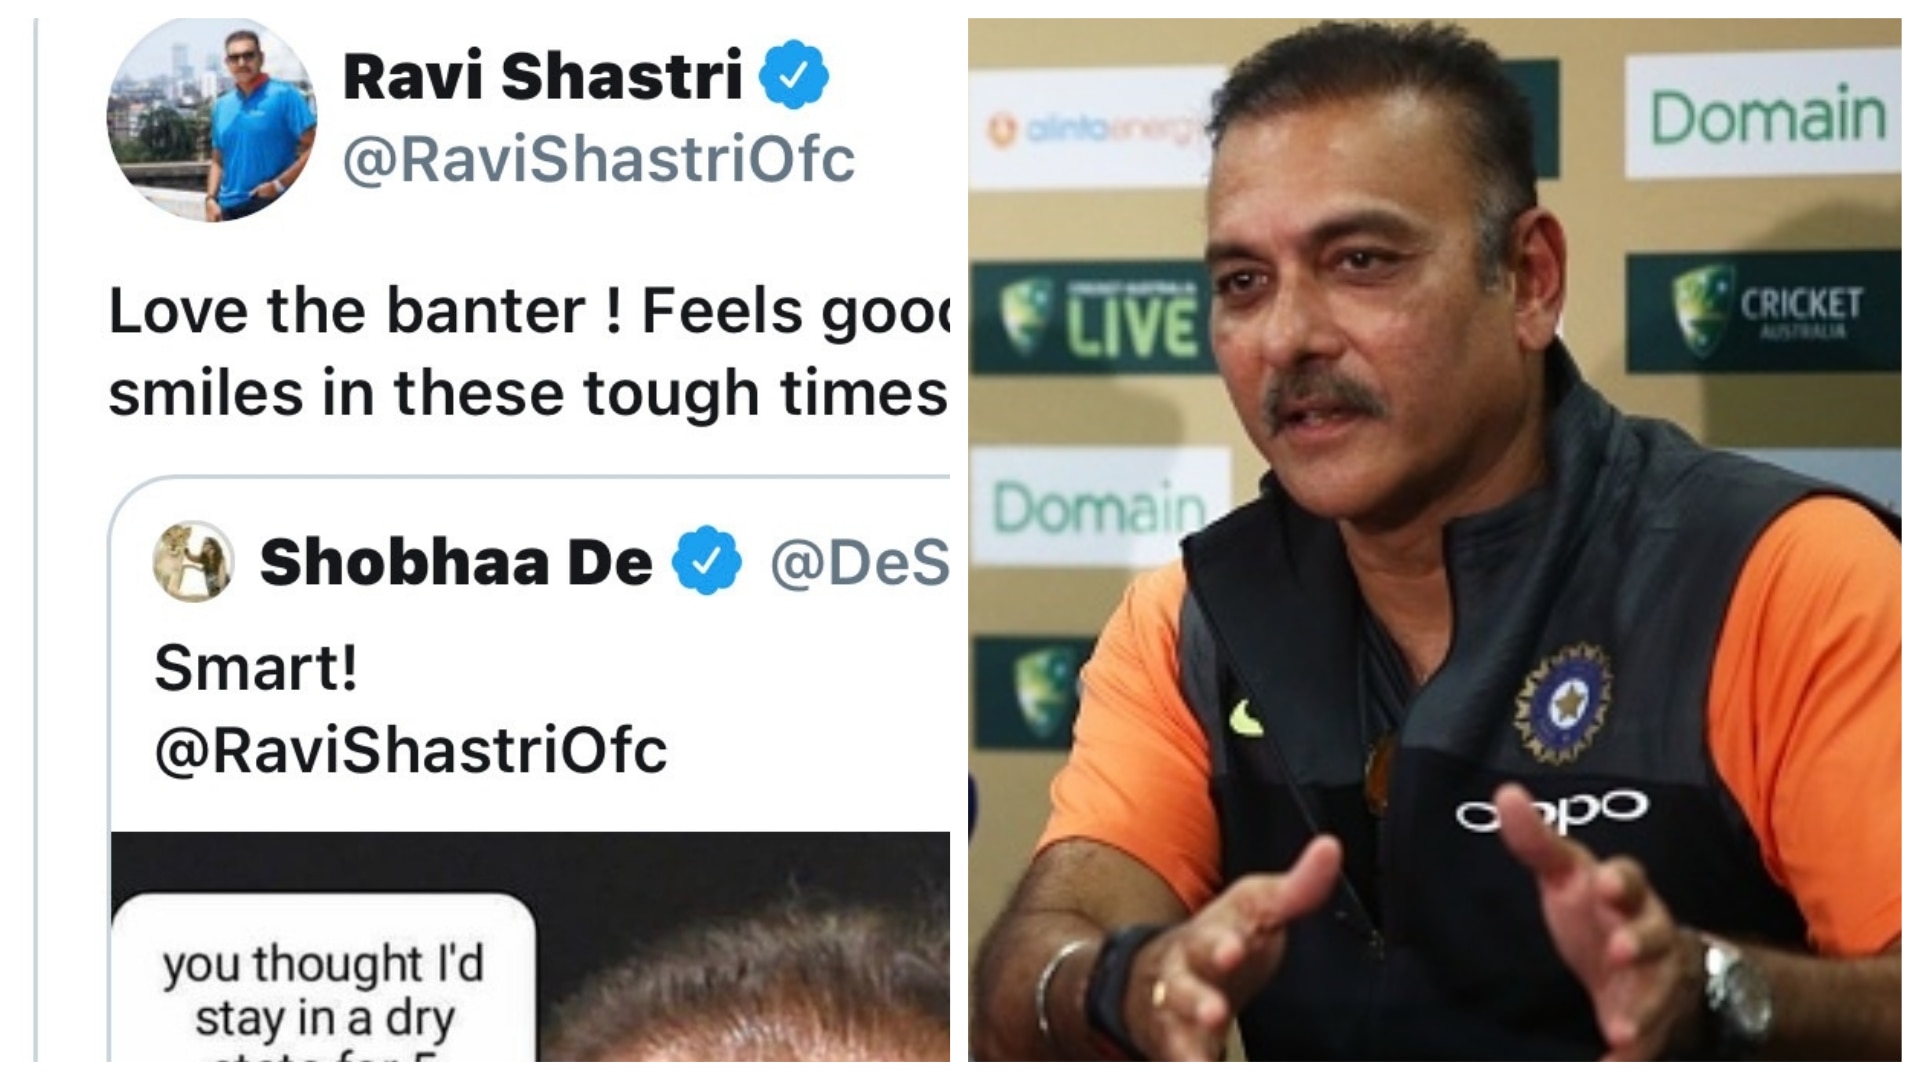 Ravi Shastri Takes A Joke On Himself; Reacts To A 'Dry State' Meme Shared  By Shobaa De